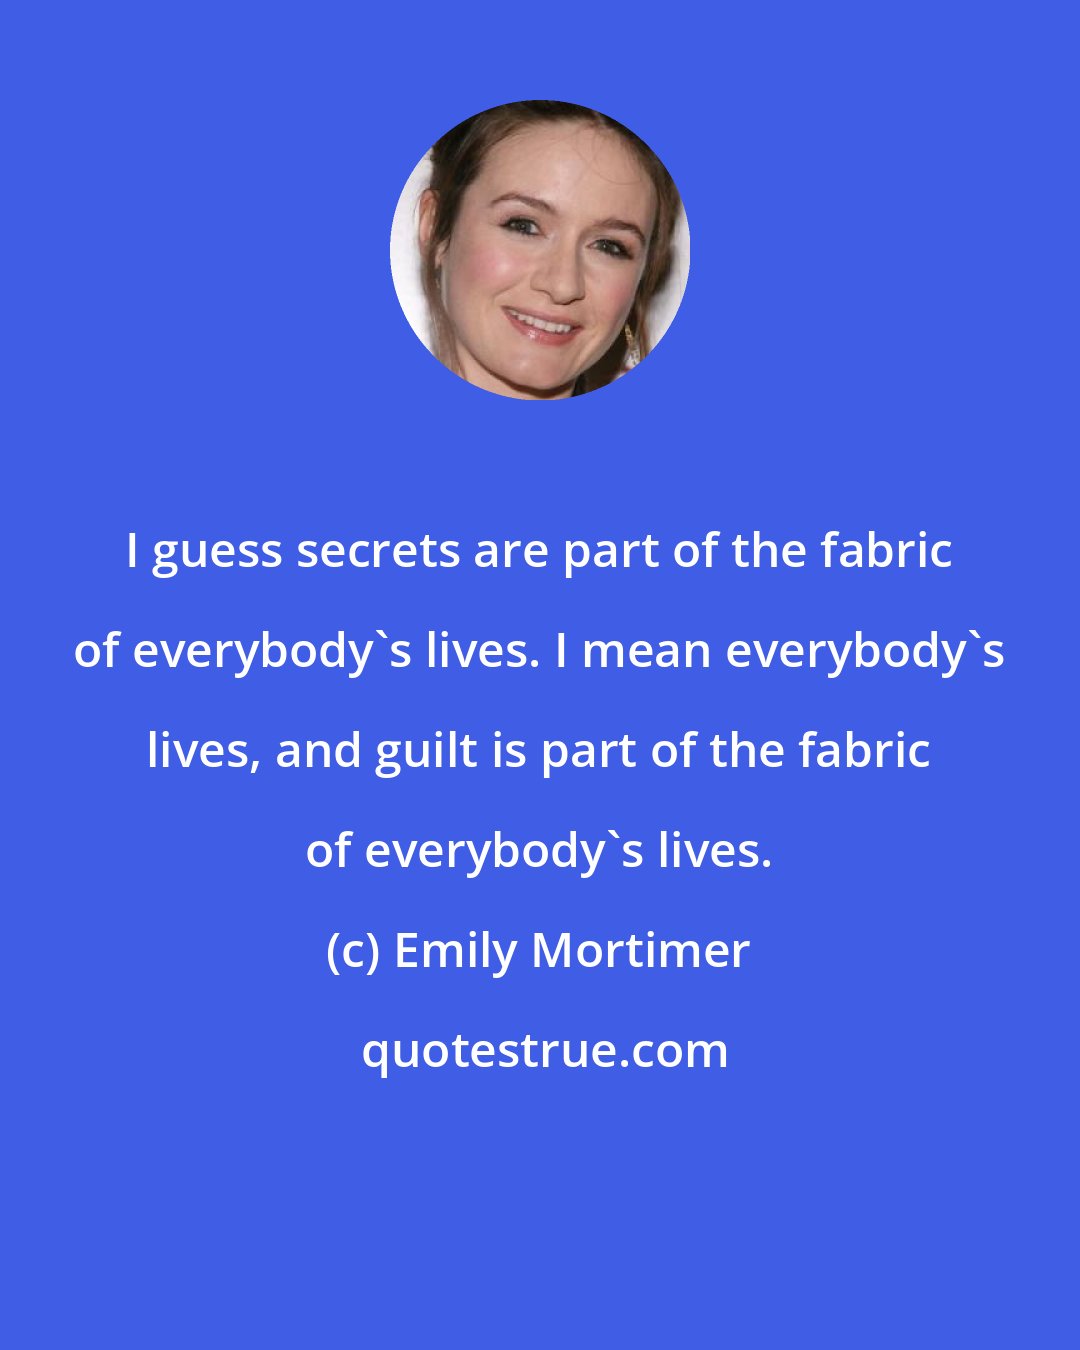 Emily Mortimer: I guess secrets are part of the fabric of everybody's lives. I mean everybody's lives, and guilt is part of the fabric of everybody's lives.